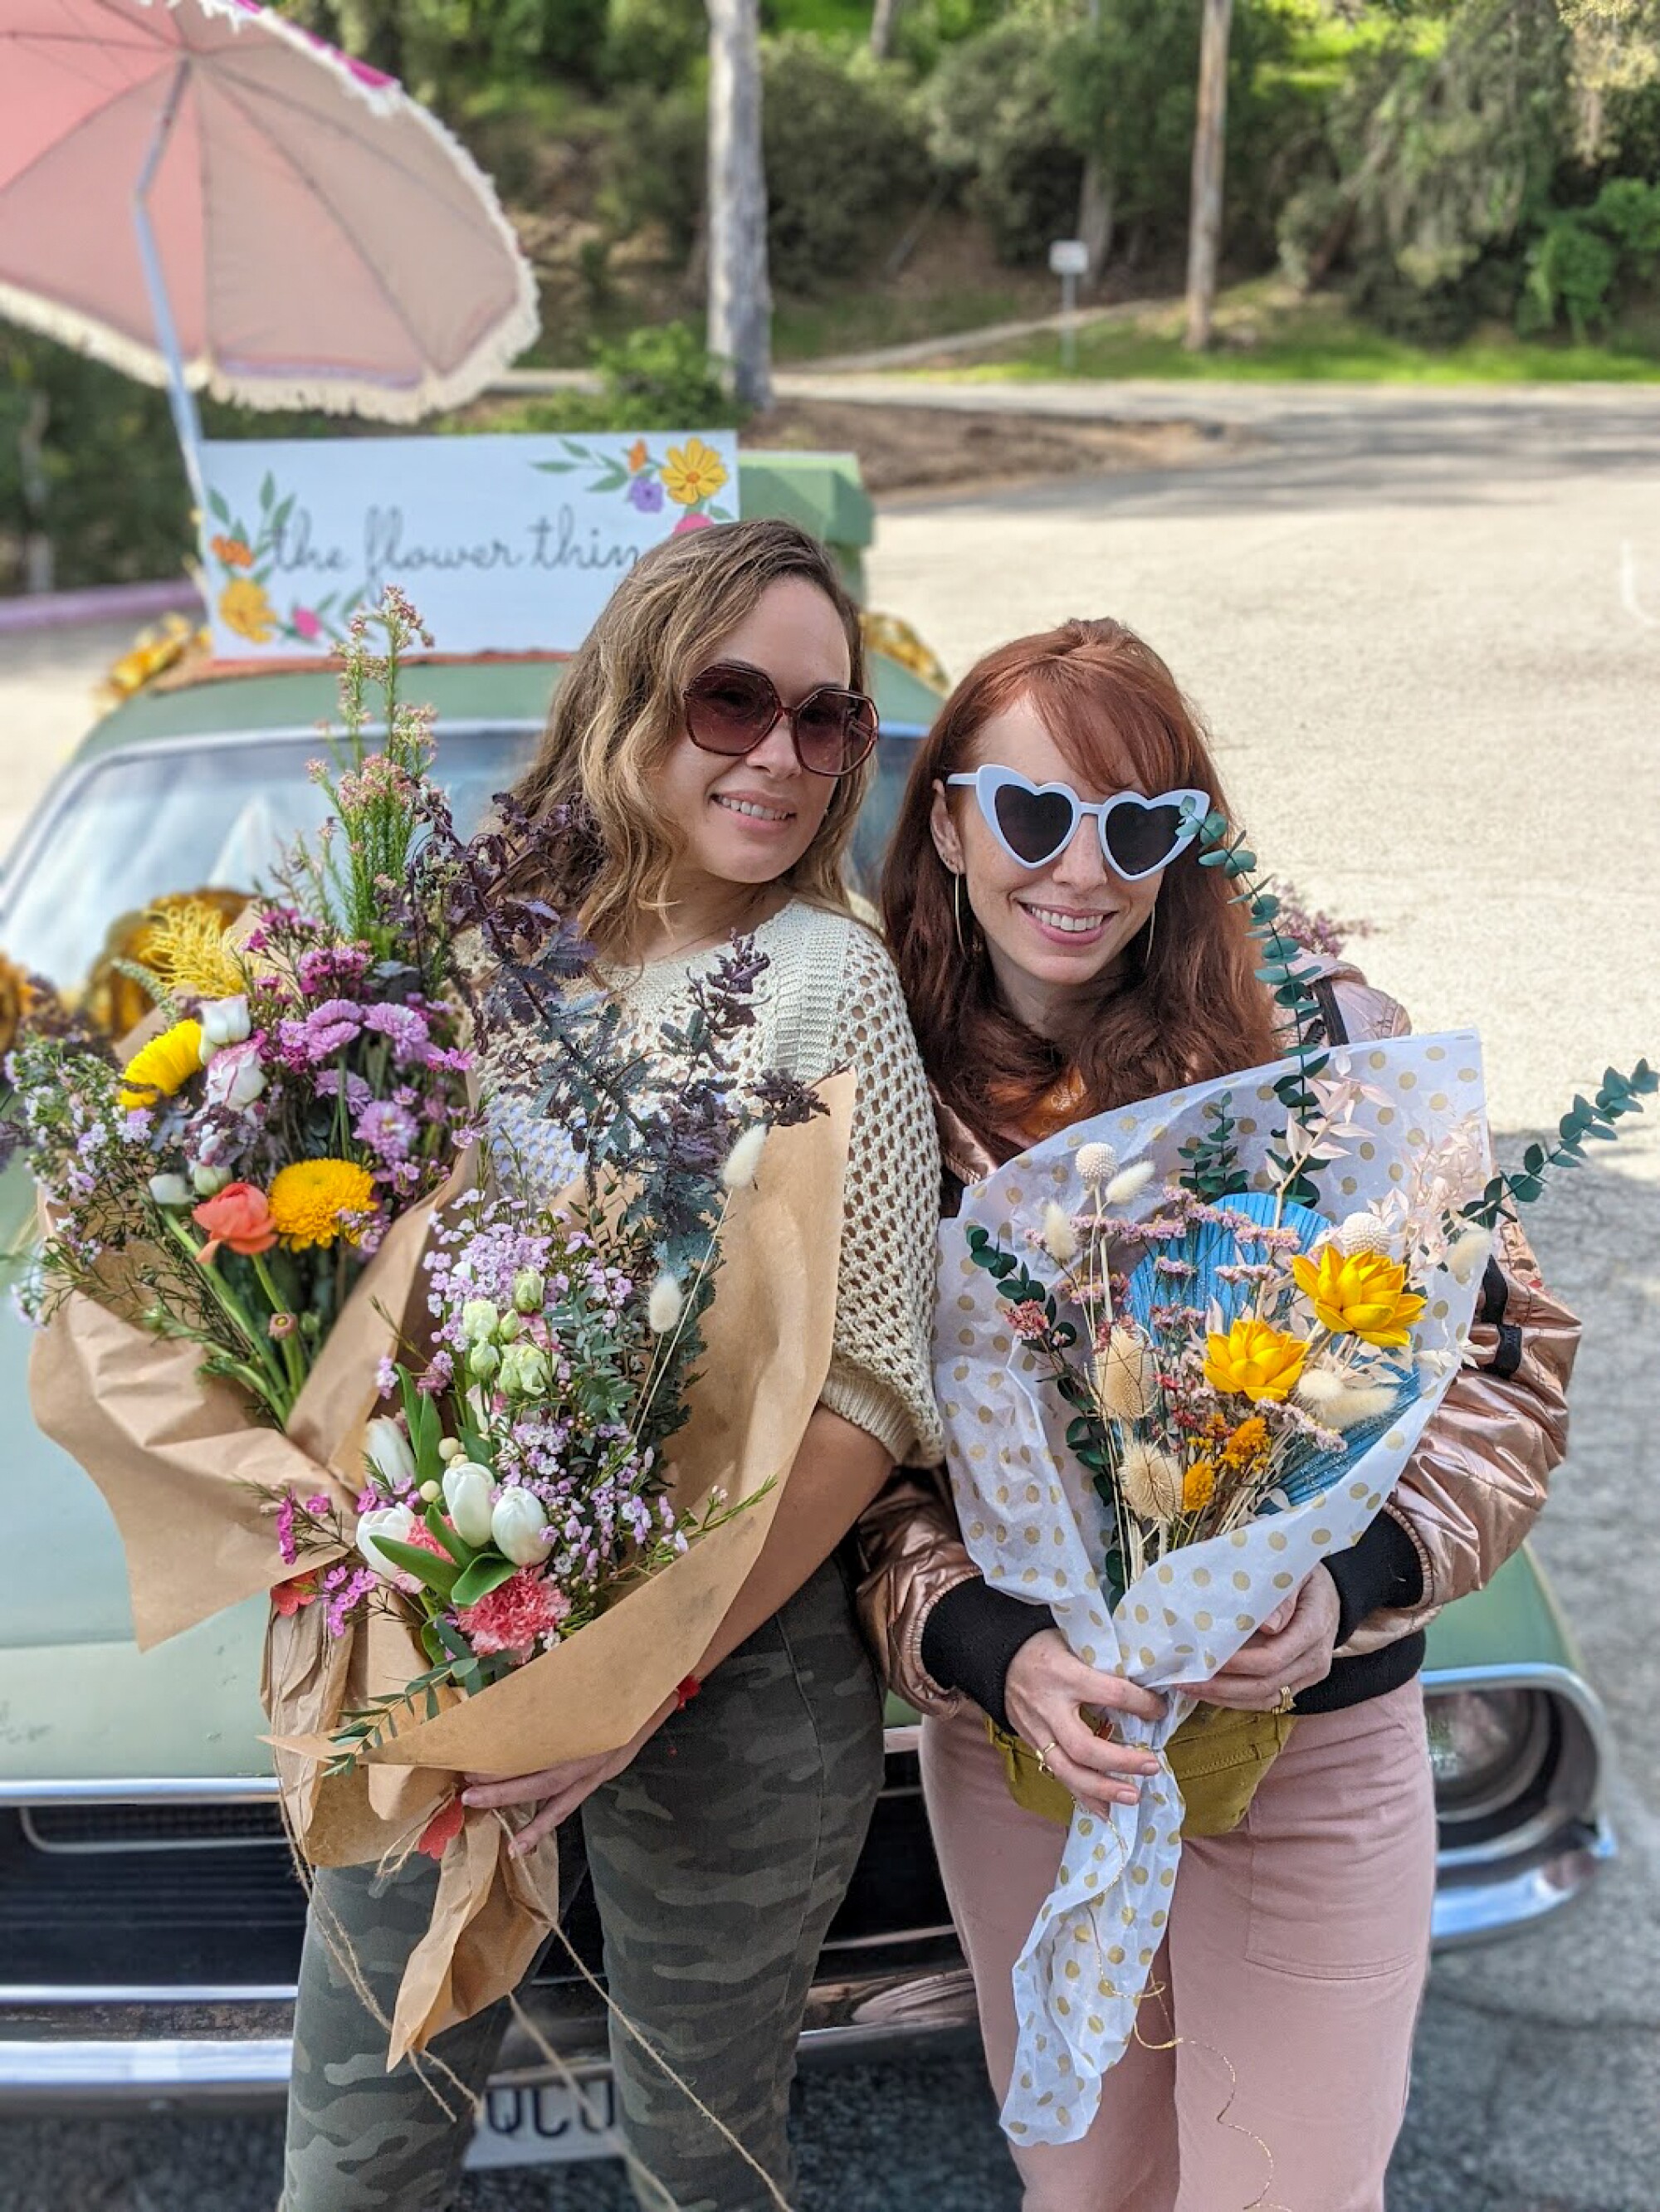 Two women lean against a car, each holding a large bouquet of flowers.